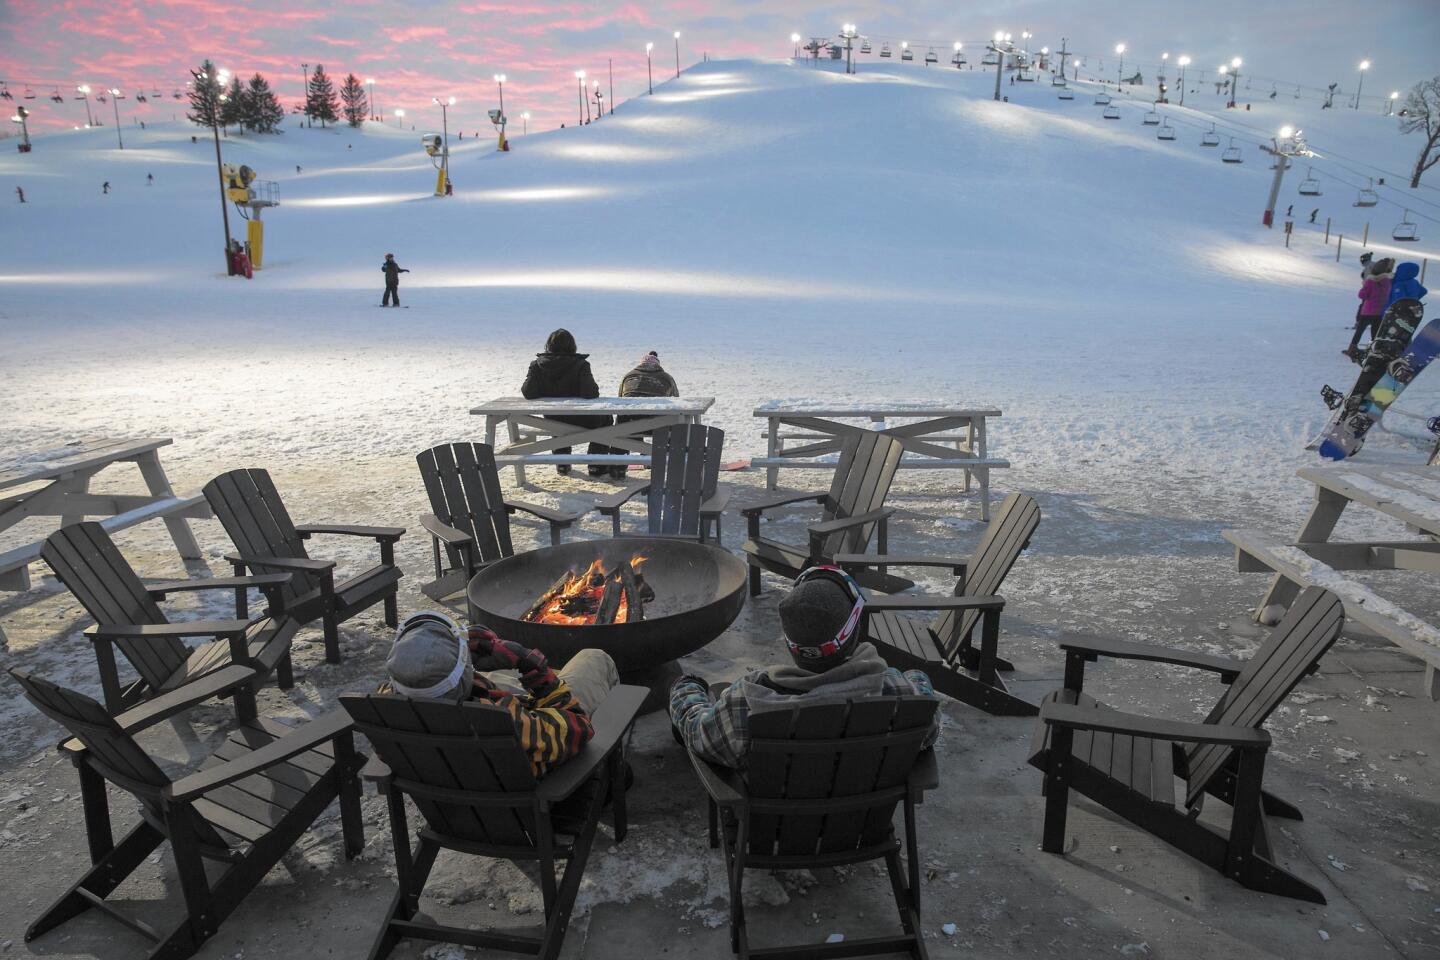 Patrons kick back and relax at the new fire pit at Wilmot Mountain, which recently opened after $13 million in renovations.